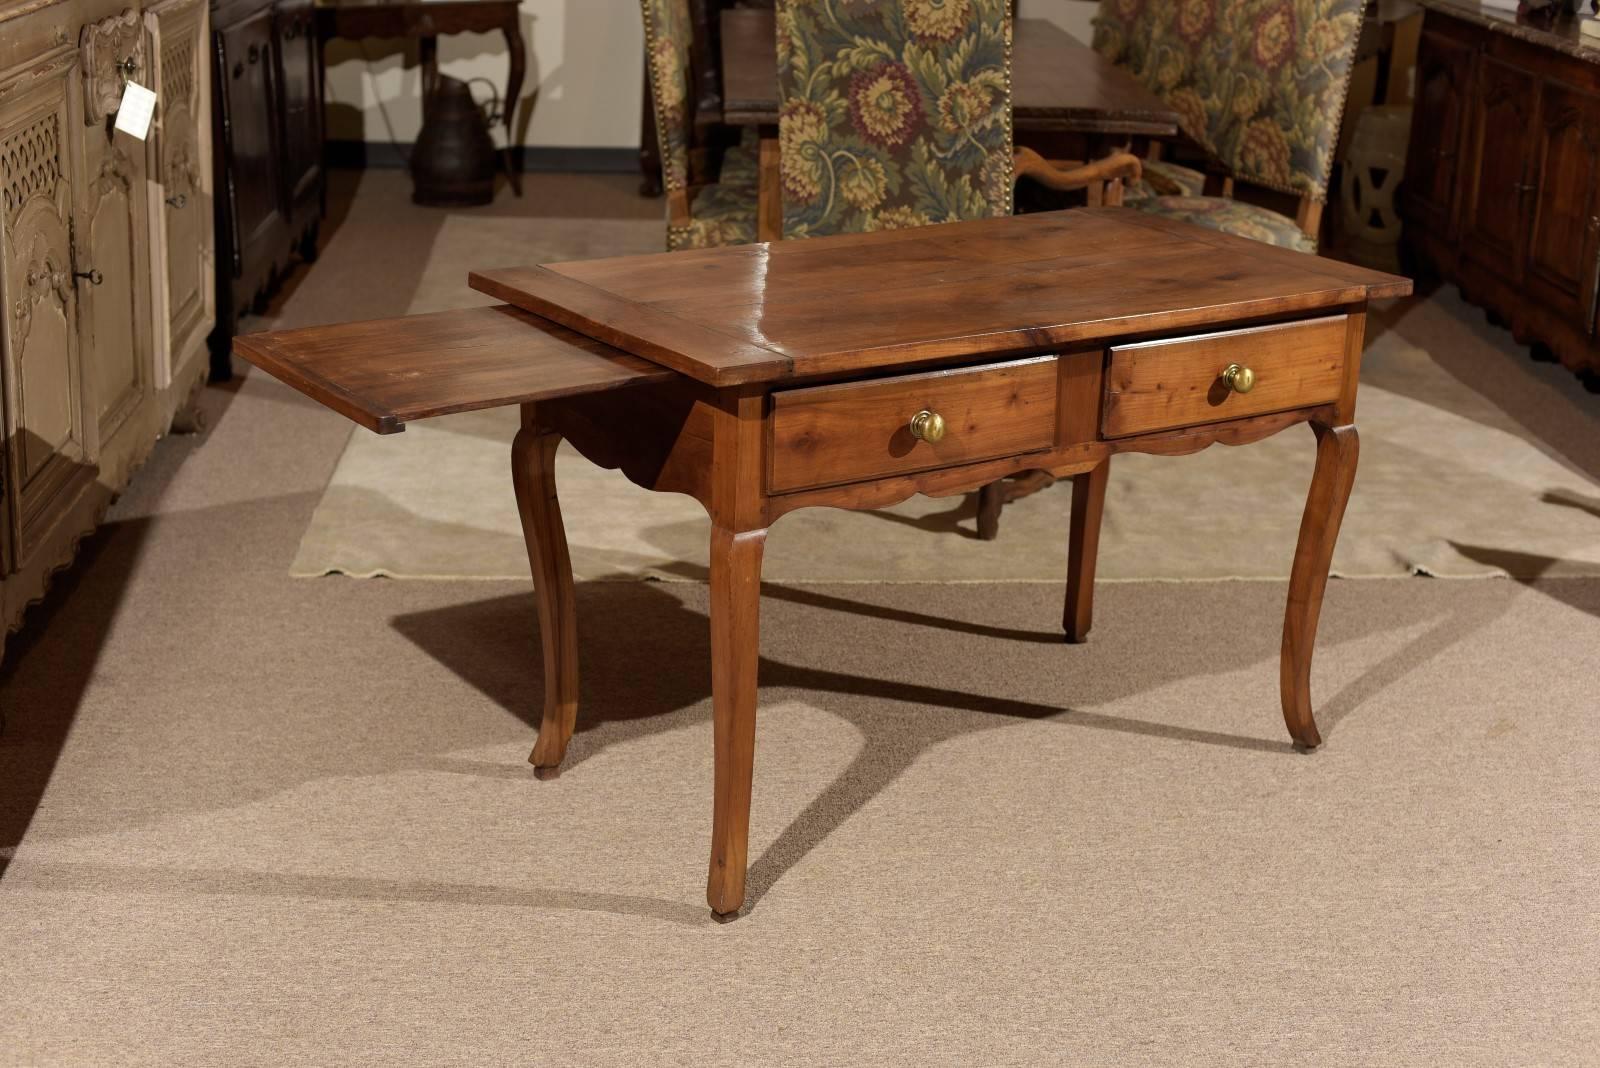 19th Century Cherry Louis XV Style Table with Two Drawers, circa 1820 For Sale 2